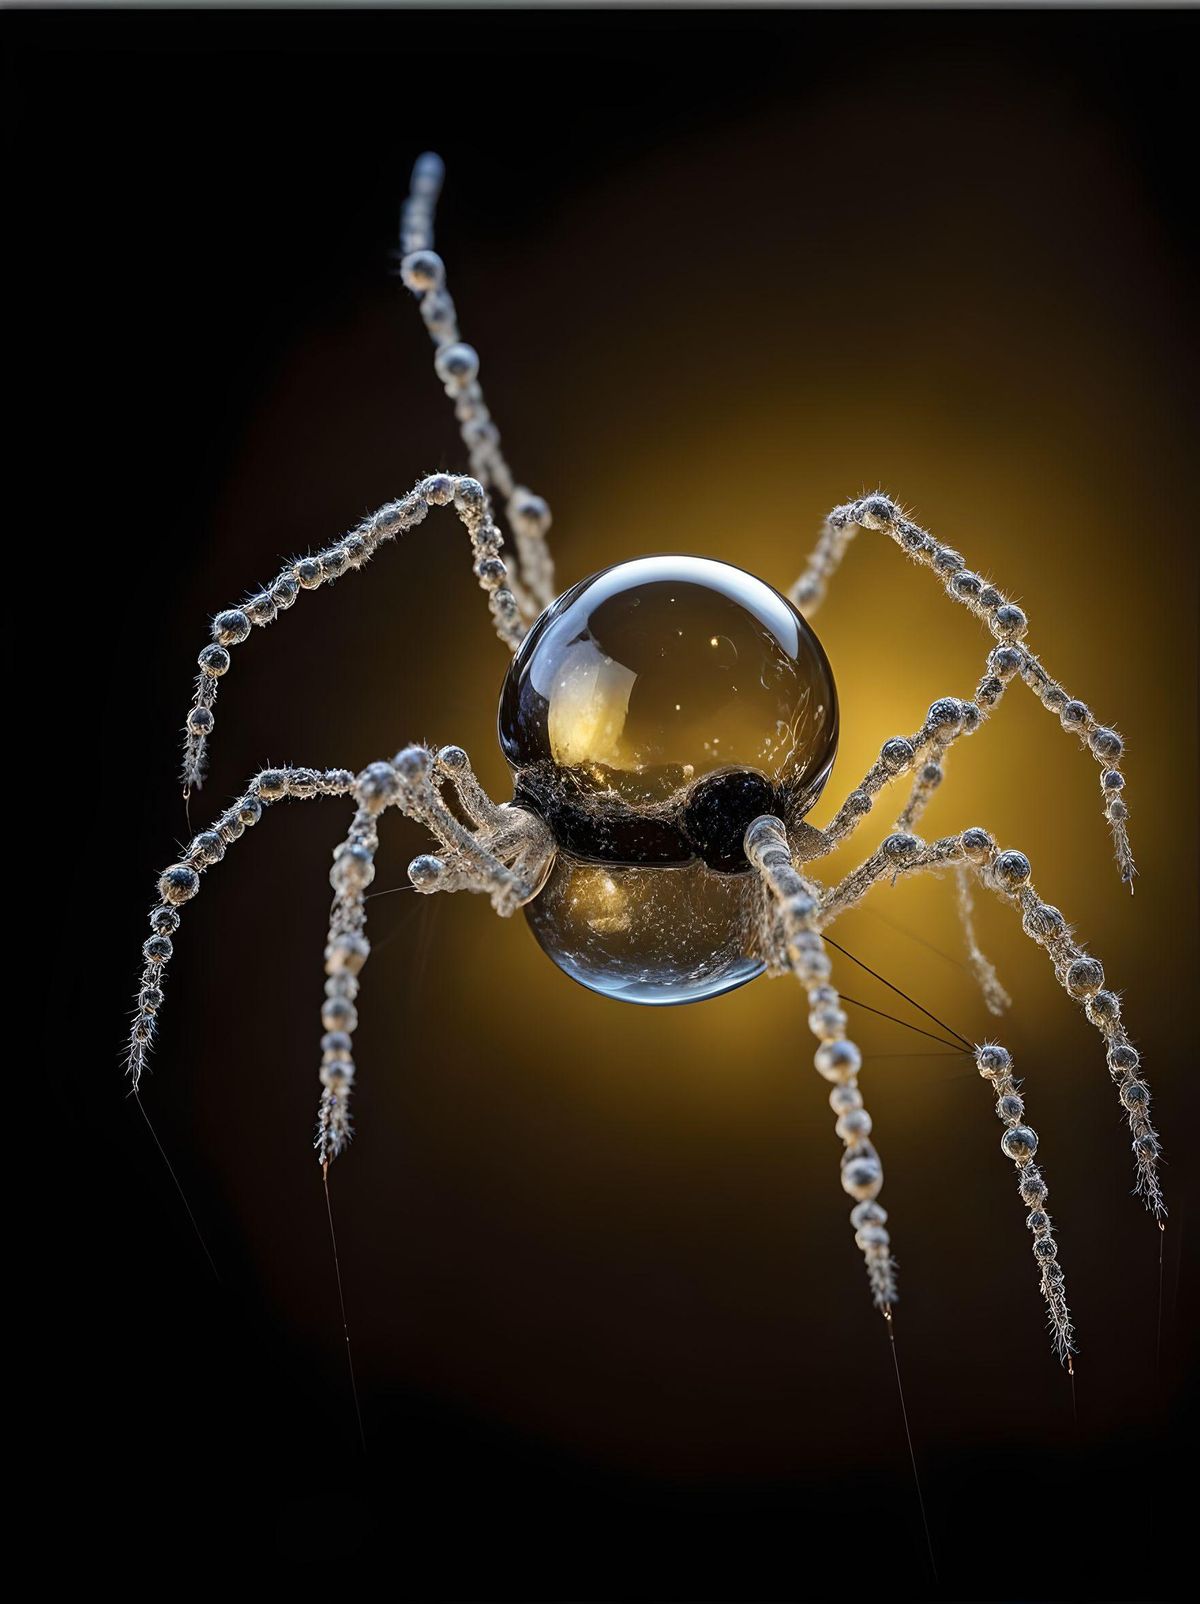 photorealistic intricate weird unusual spider completely made of soap bubbles, highly detailed, against black studio background, perfectly rendered 
Model:  stable-diffusion-xl-base-1-0 
LoRA:  Aether_Bubbles_And_Foam_v1_SDXL_LoRA - 0.3  
LoRA:  xl_more_art-full-beta2 - 0.75